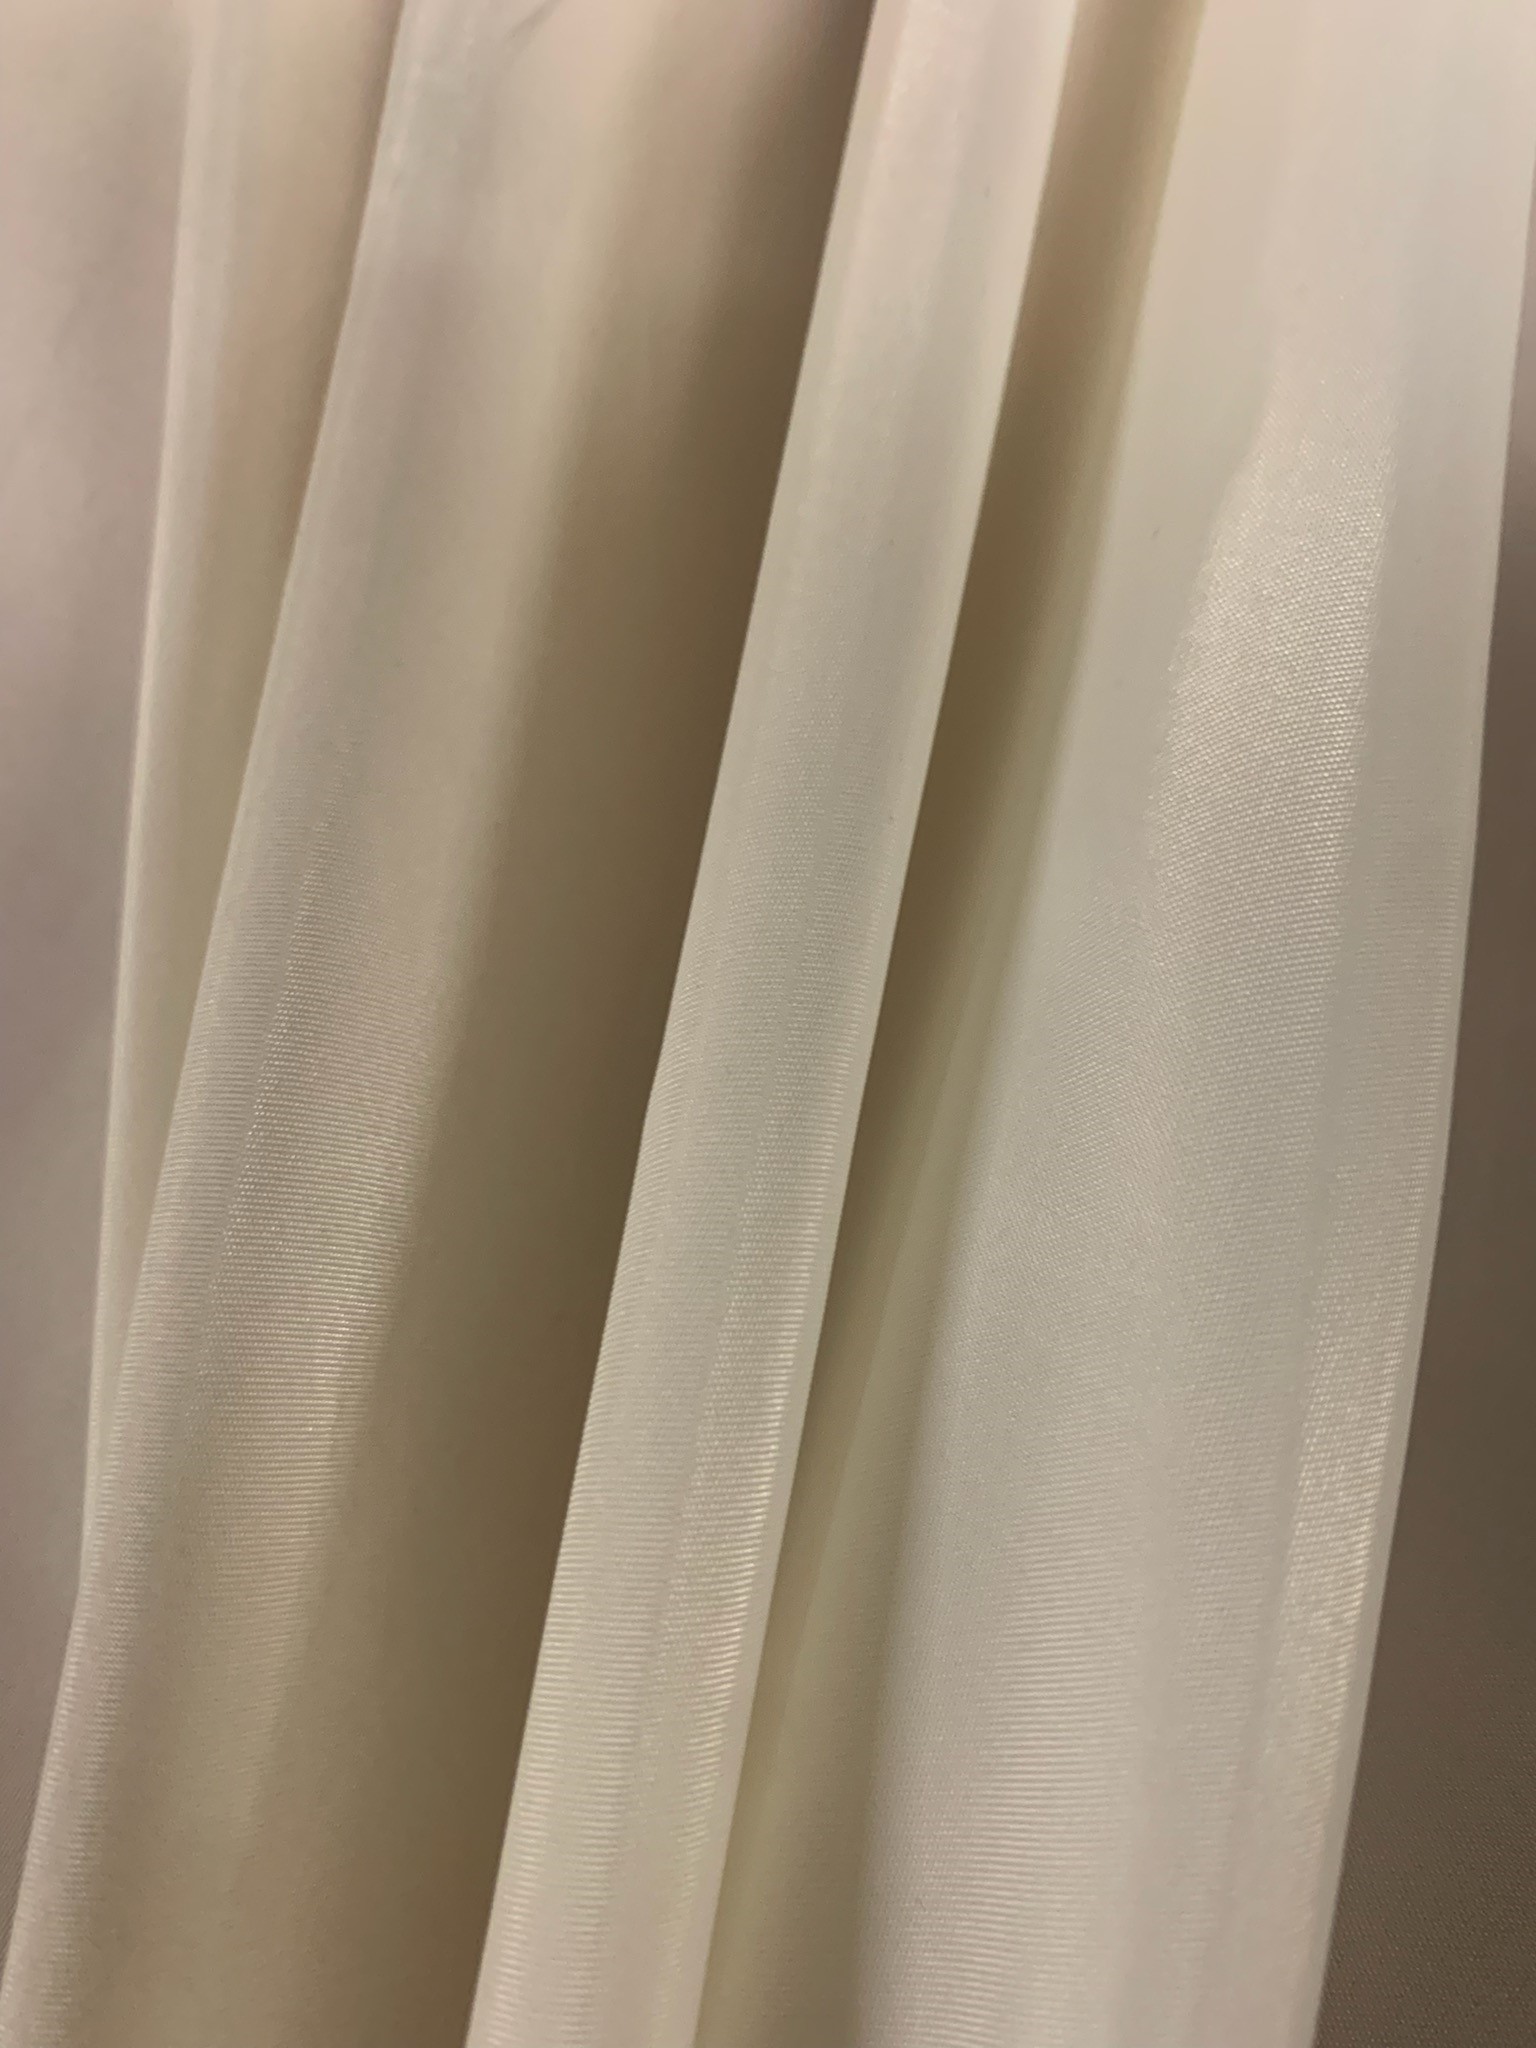 Ivory Lining Fabric 60" By The Yard - 100% Polyester